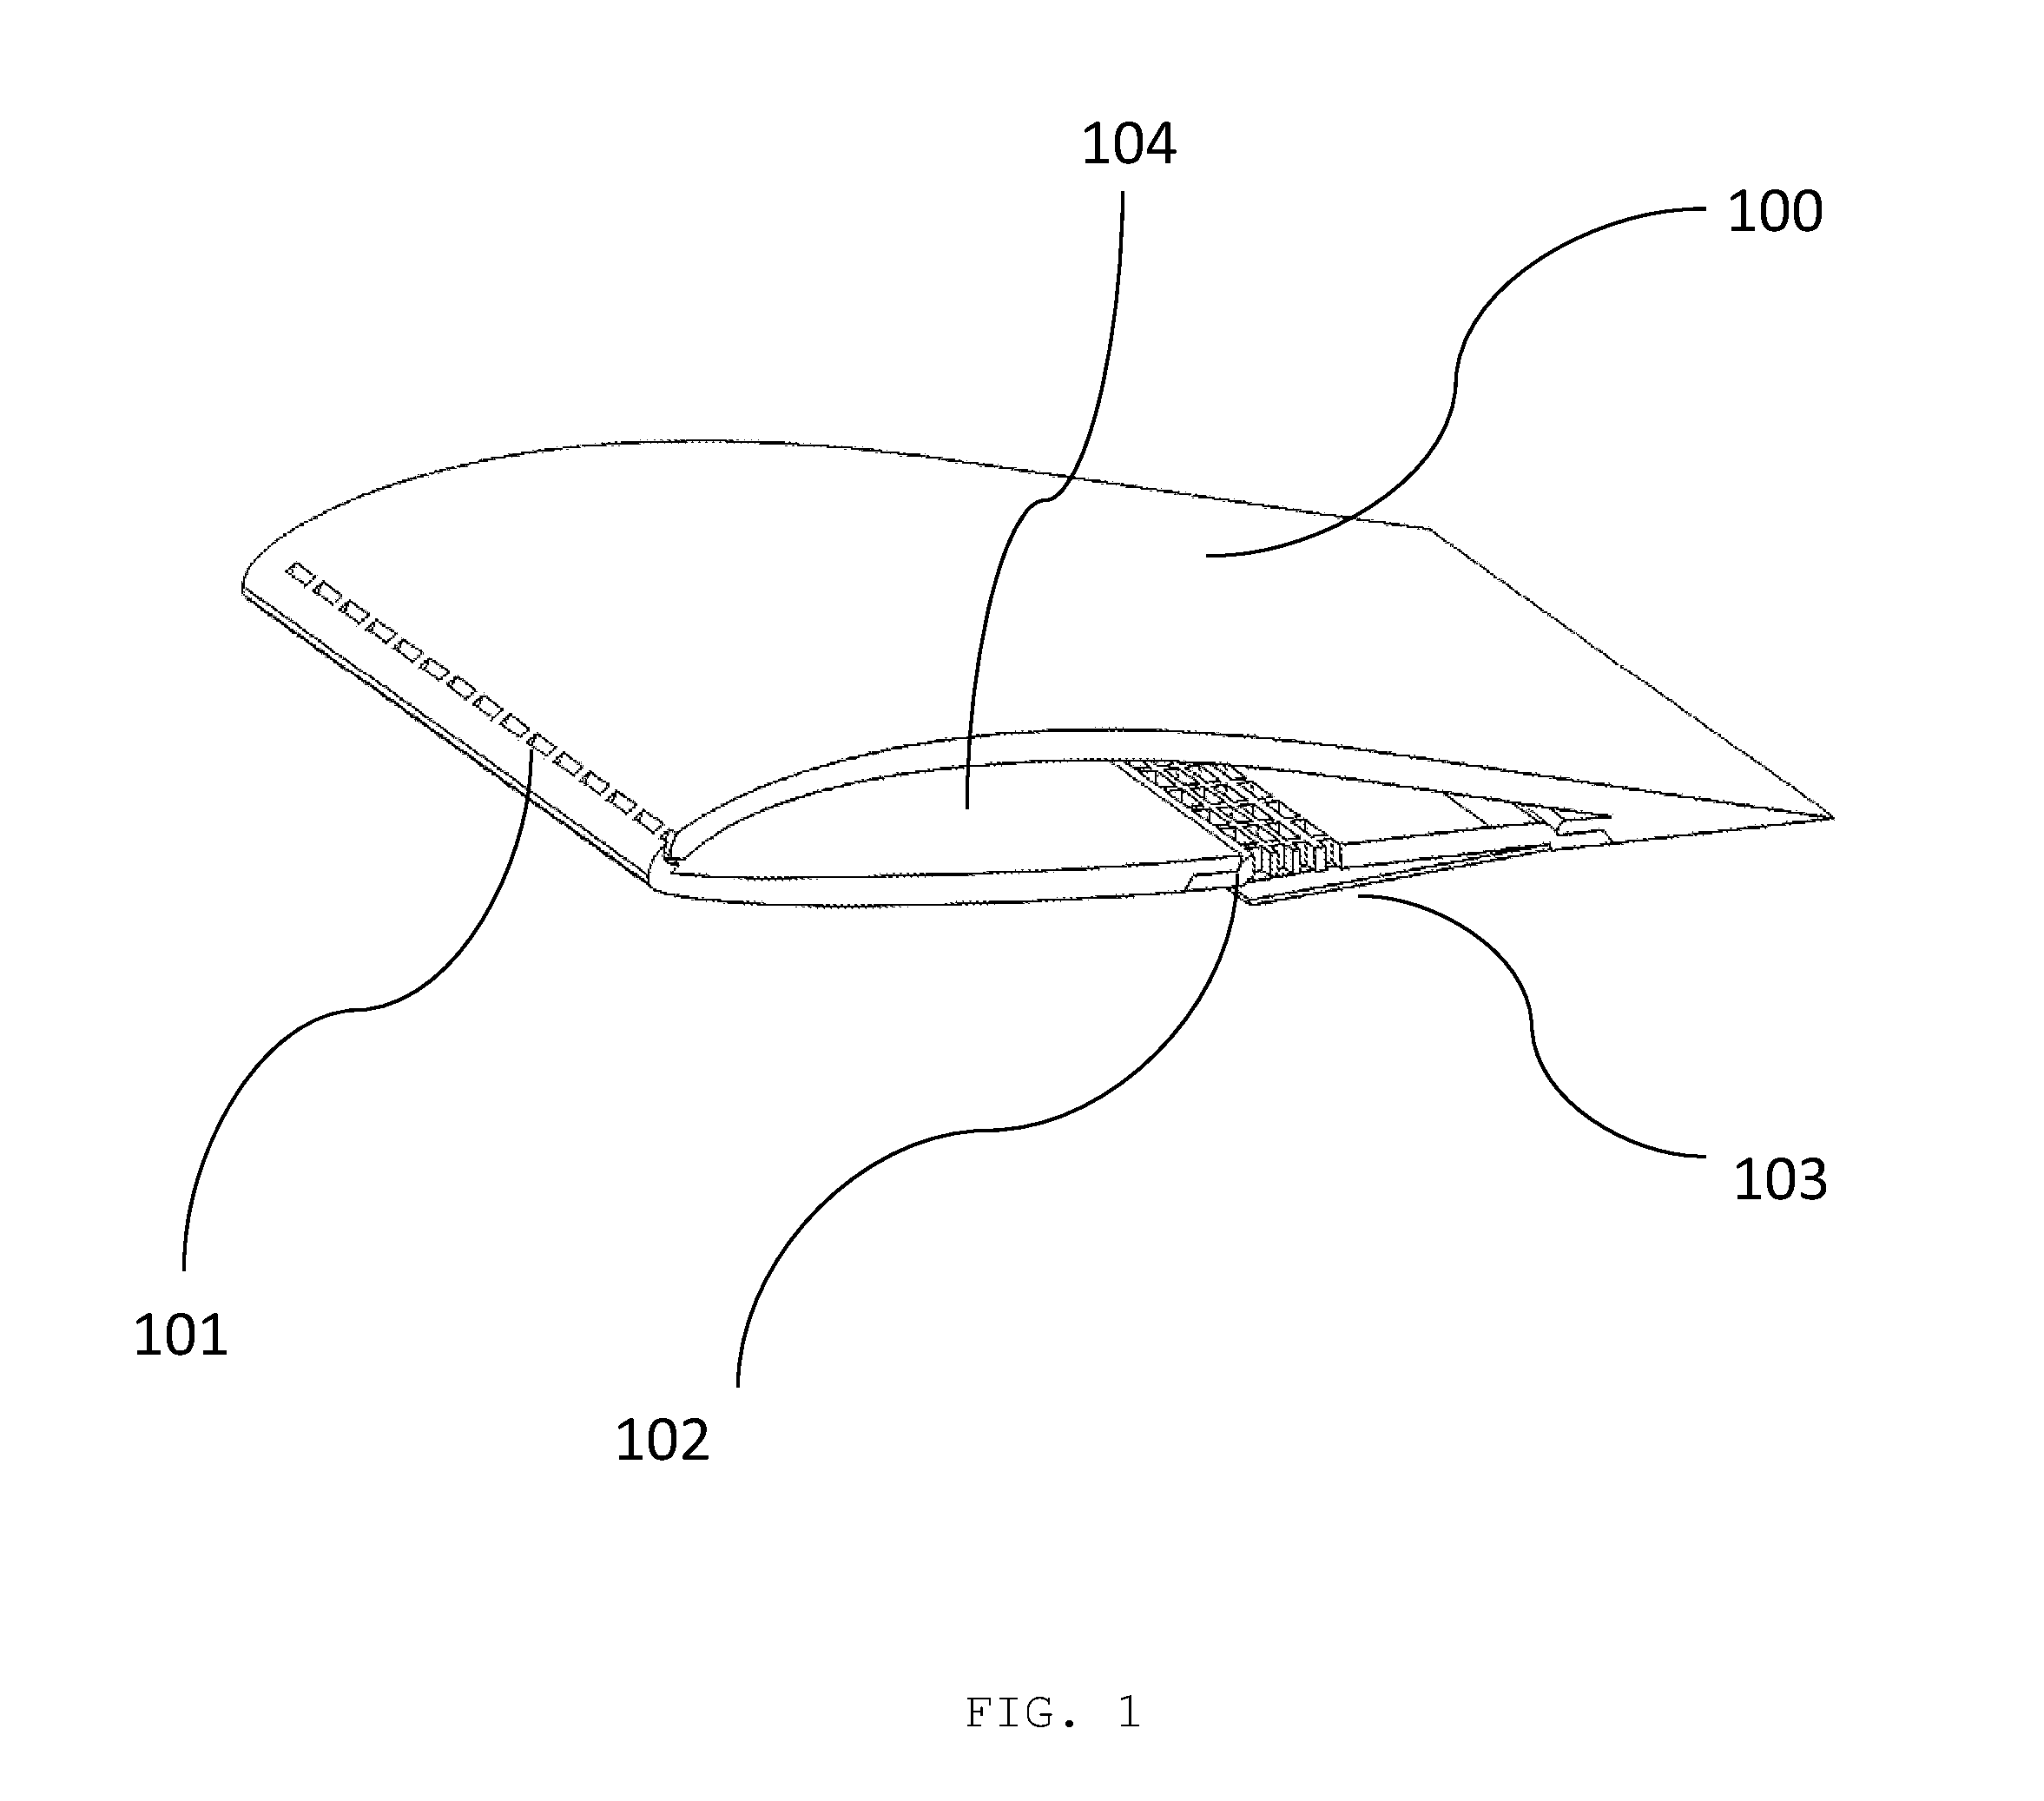 System and Method for Distributed Active Fluidic Bleed Control